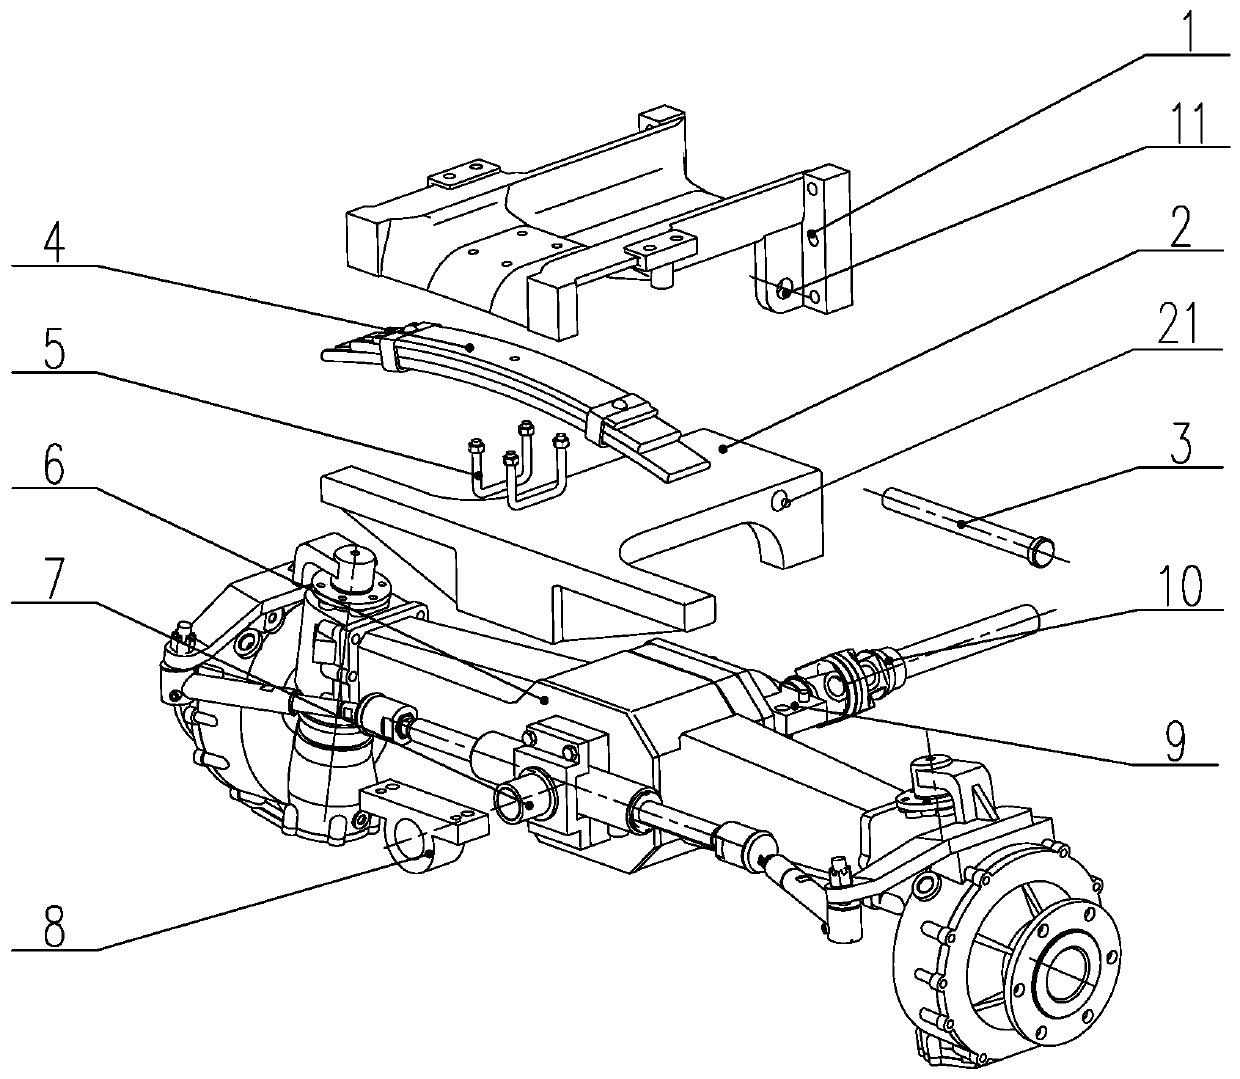 Double-bracket vibration damping front drive axle of tractor